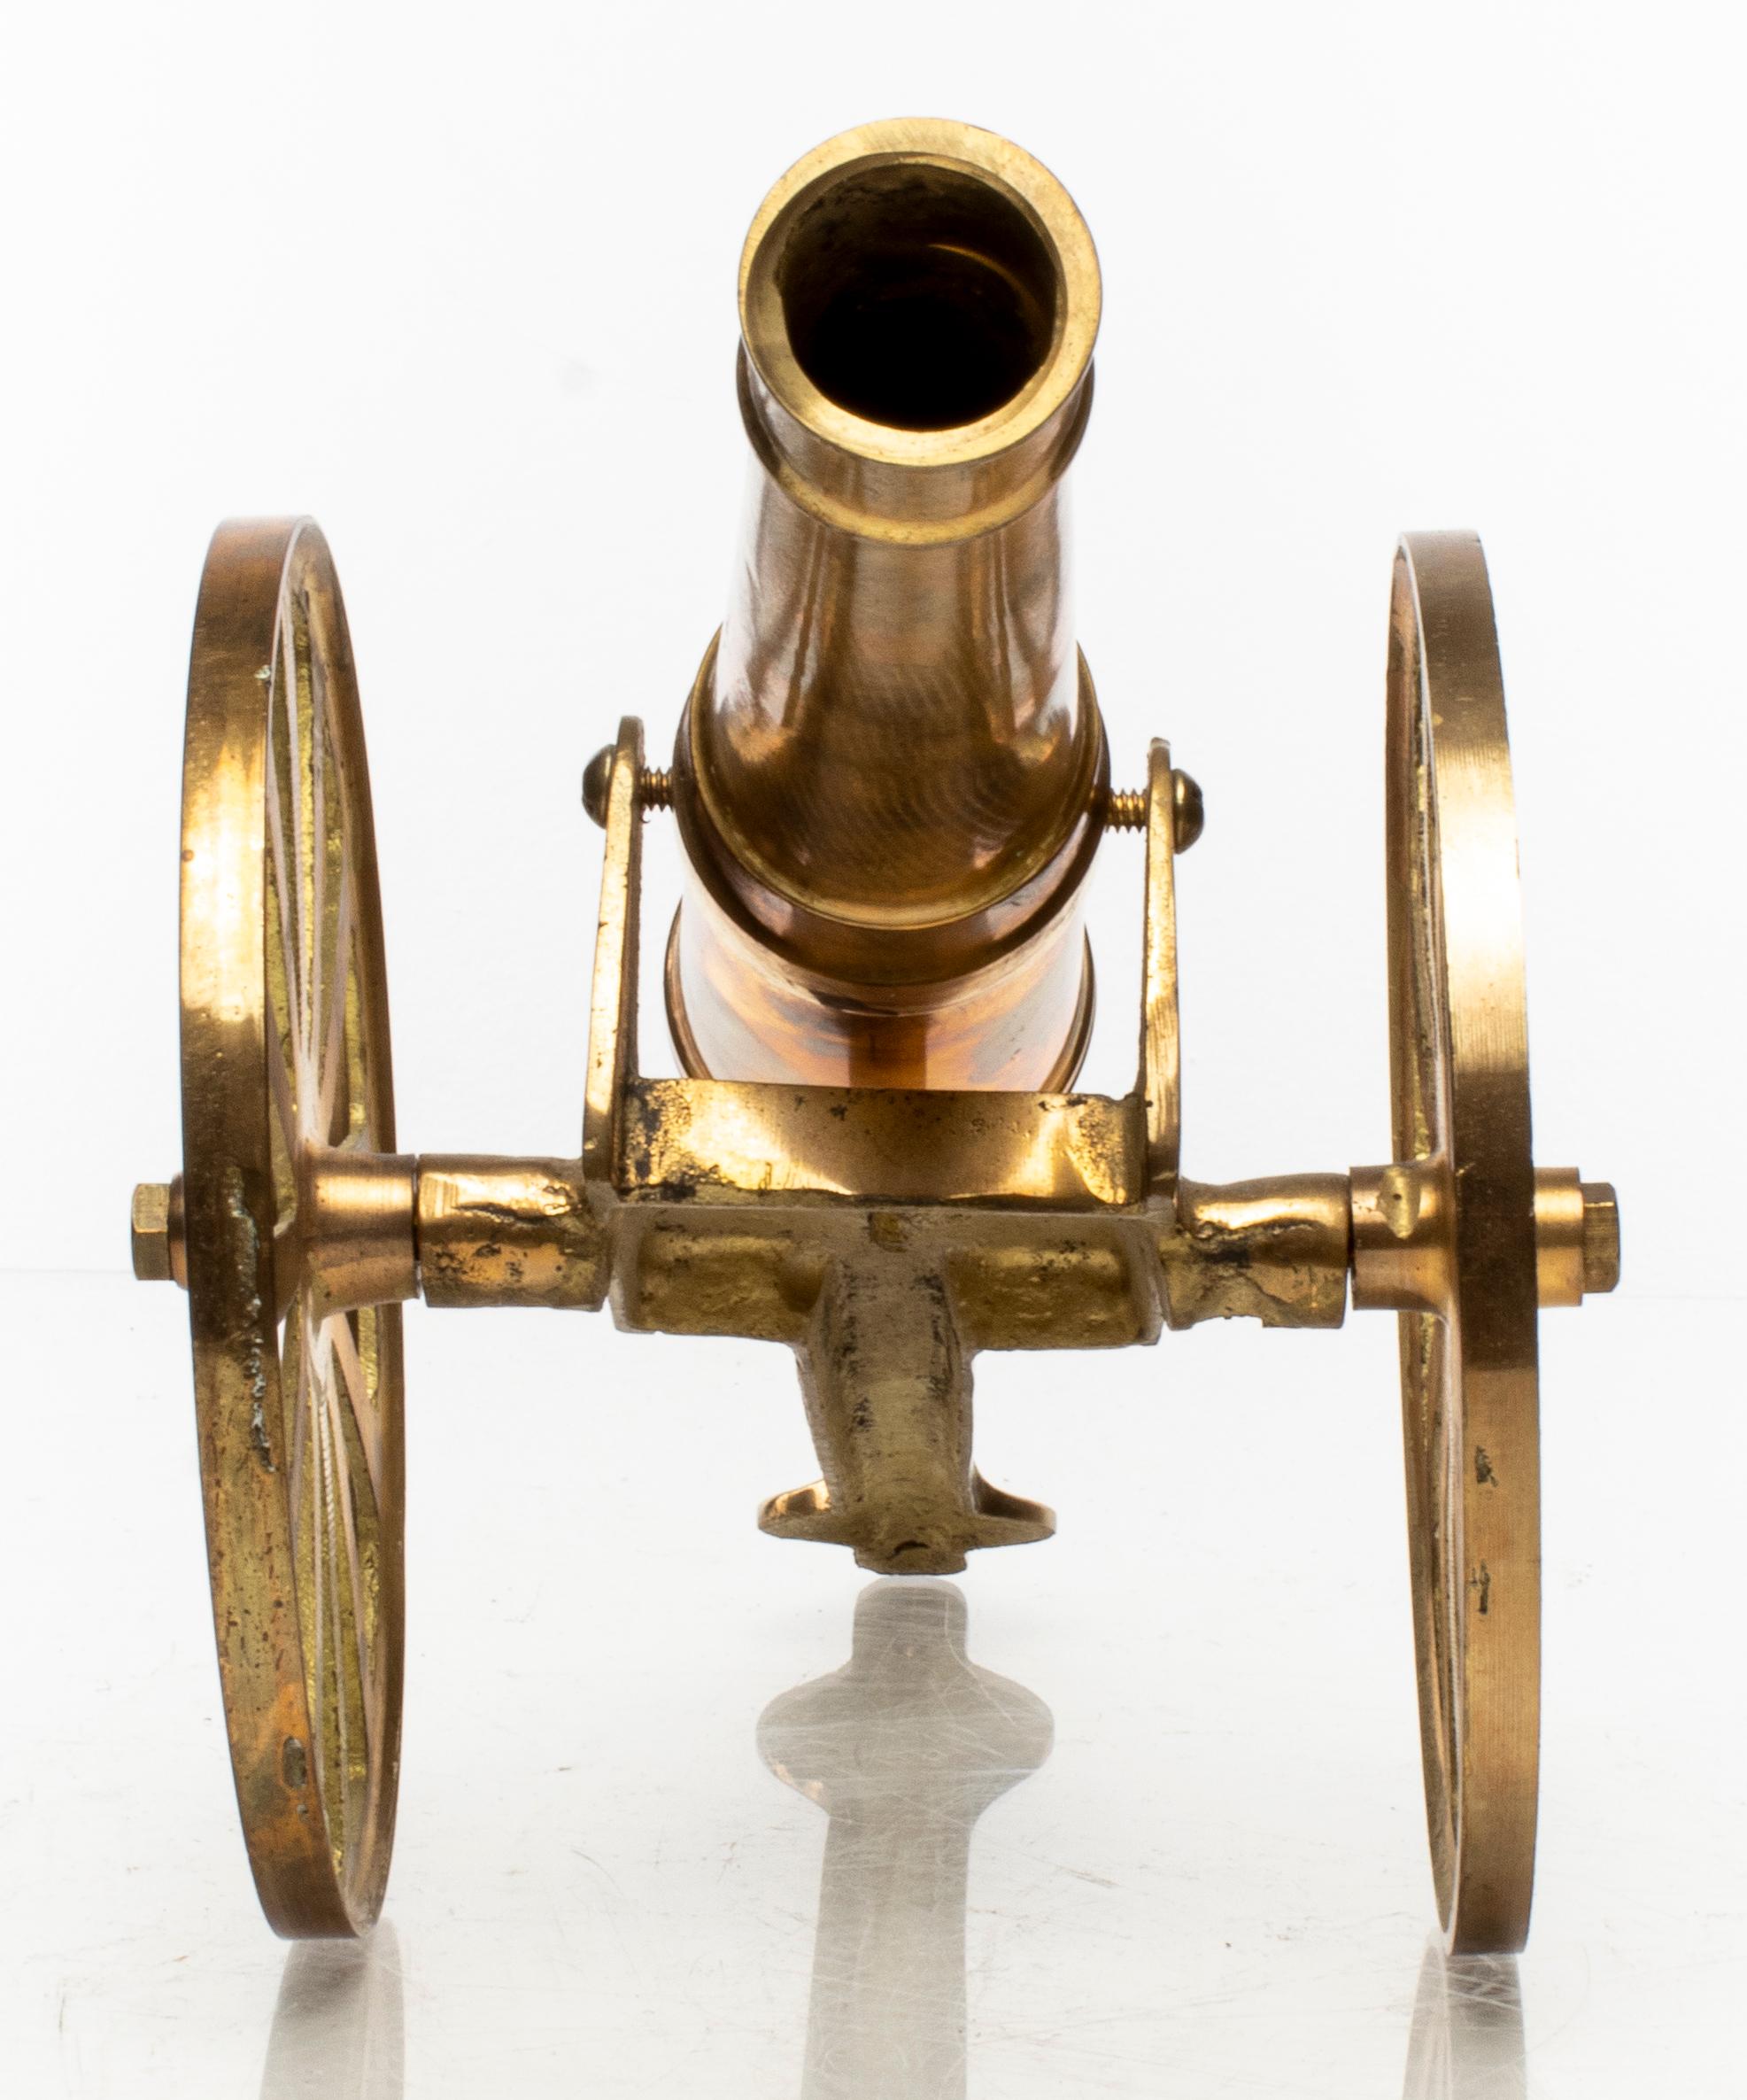 20th Century Brass Tabletop Model of a Cannon